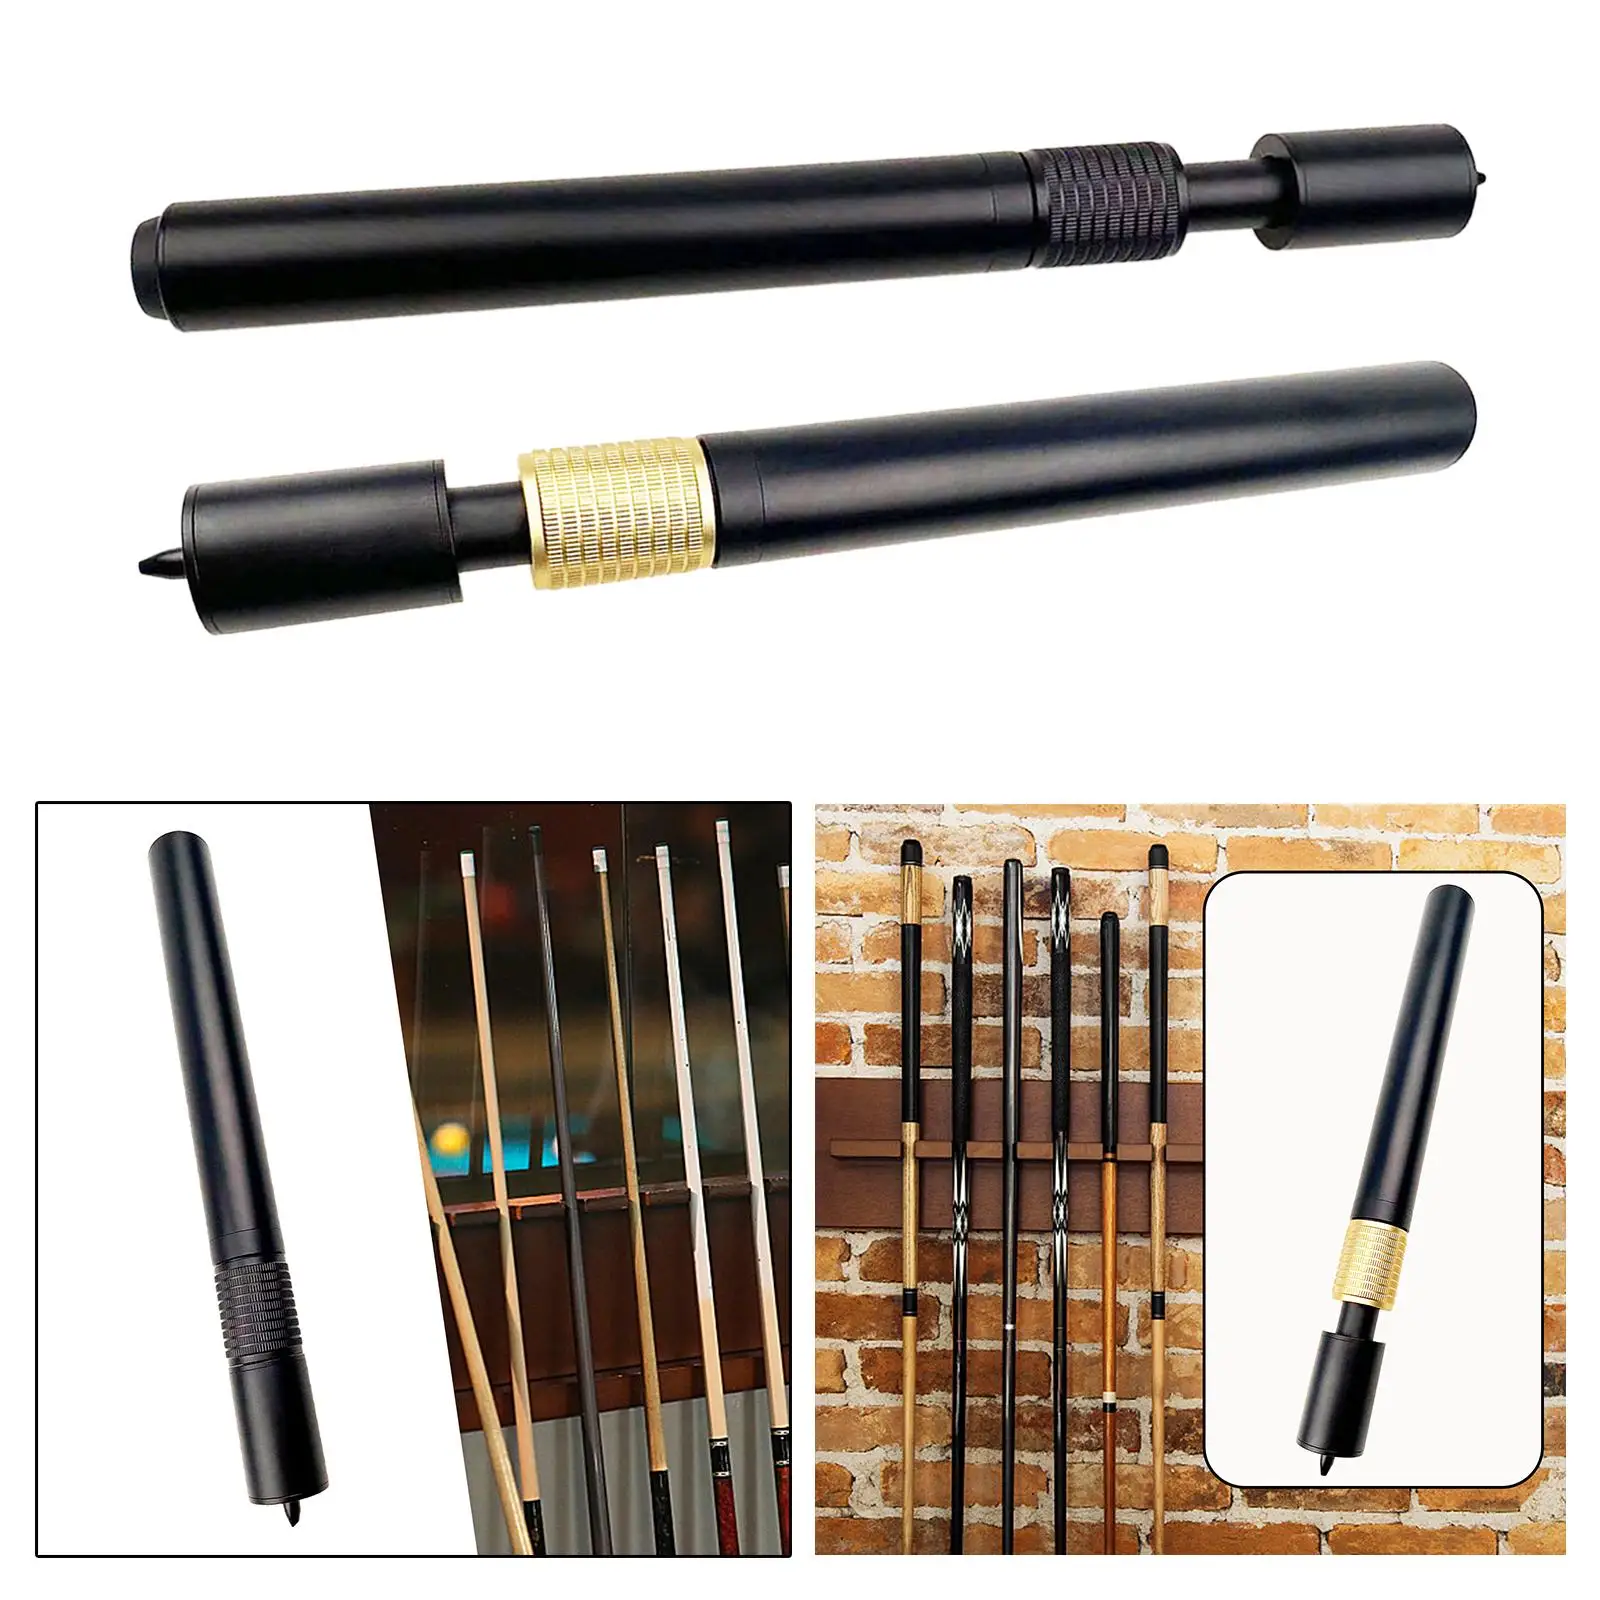 Telescopic Billiards Pool Cue Extension Compact Cue End Lengthener for Outdoor Snooker Billiard Practice Athlete Enthusiast